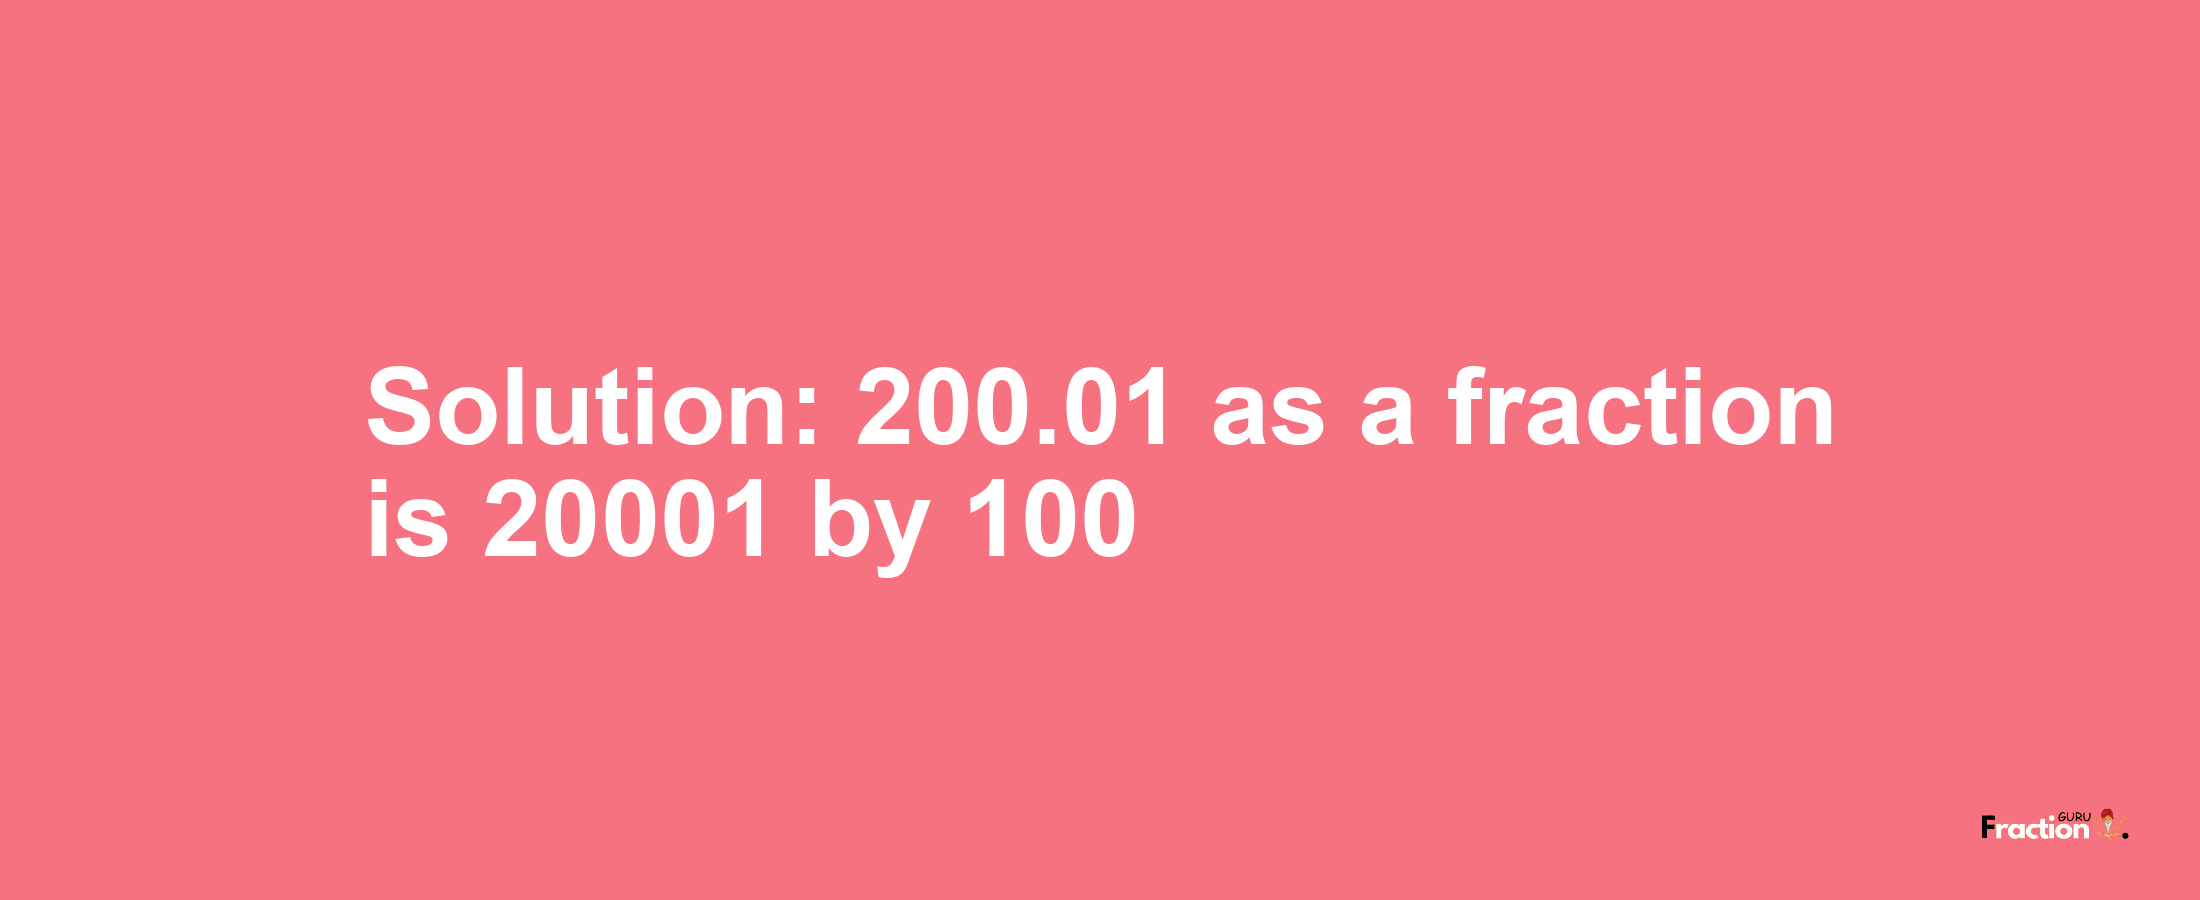 Solution:200.01 as a fraction is 20001/100